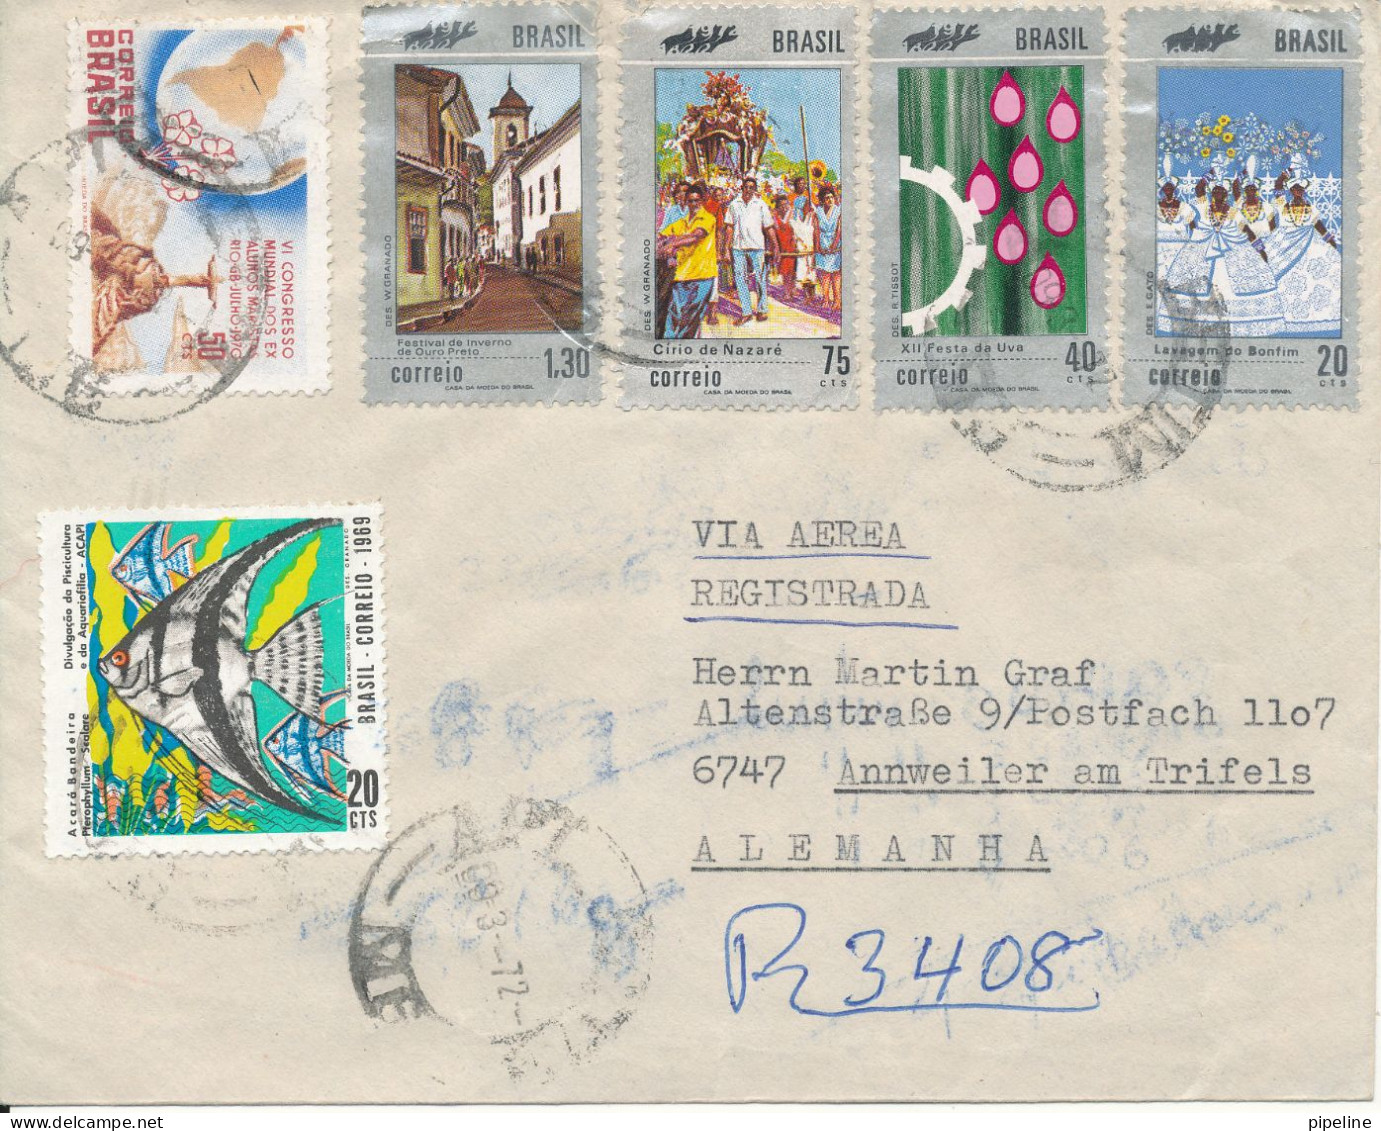 Brazil Registered Cover Sent To Denmark 1969 With More Topic Stamps (2 Stamps With A Damaged Corner) - Briefe U. Dokumente